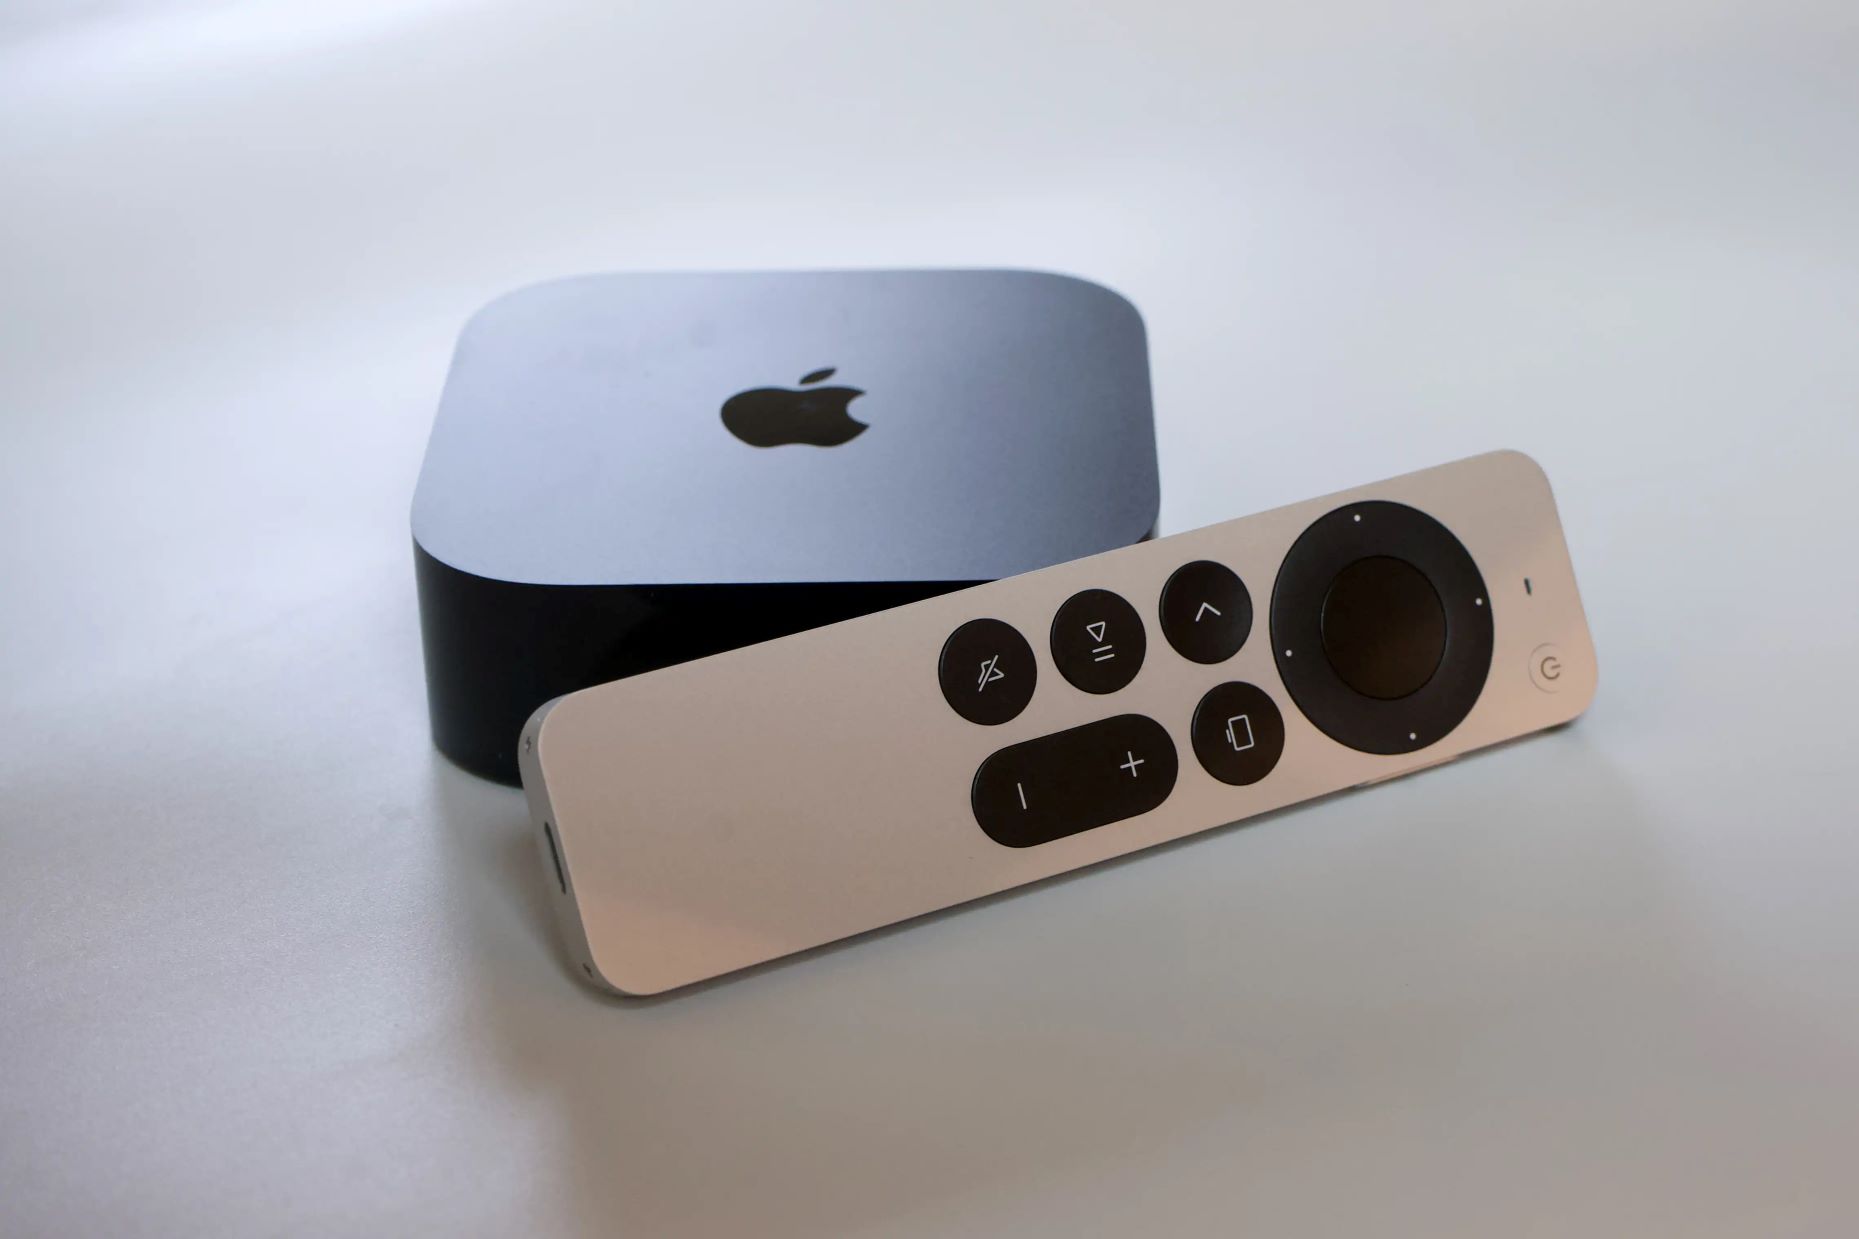 How To Download Apps On A 3rd Generation Apple TV